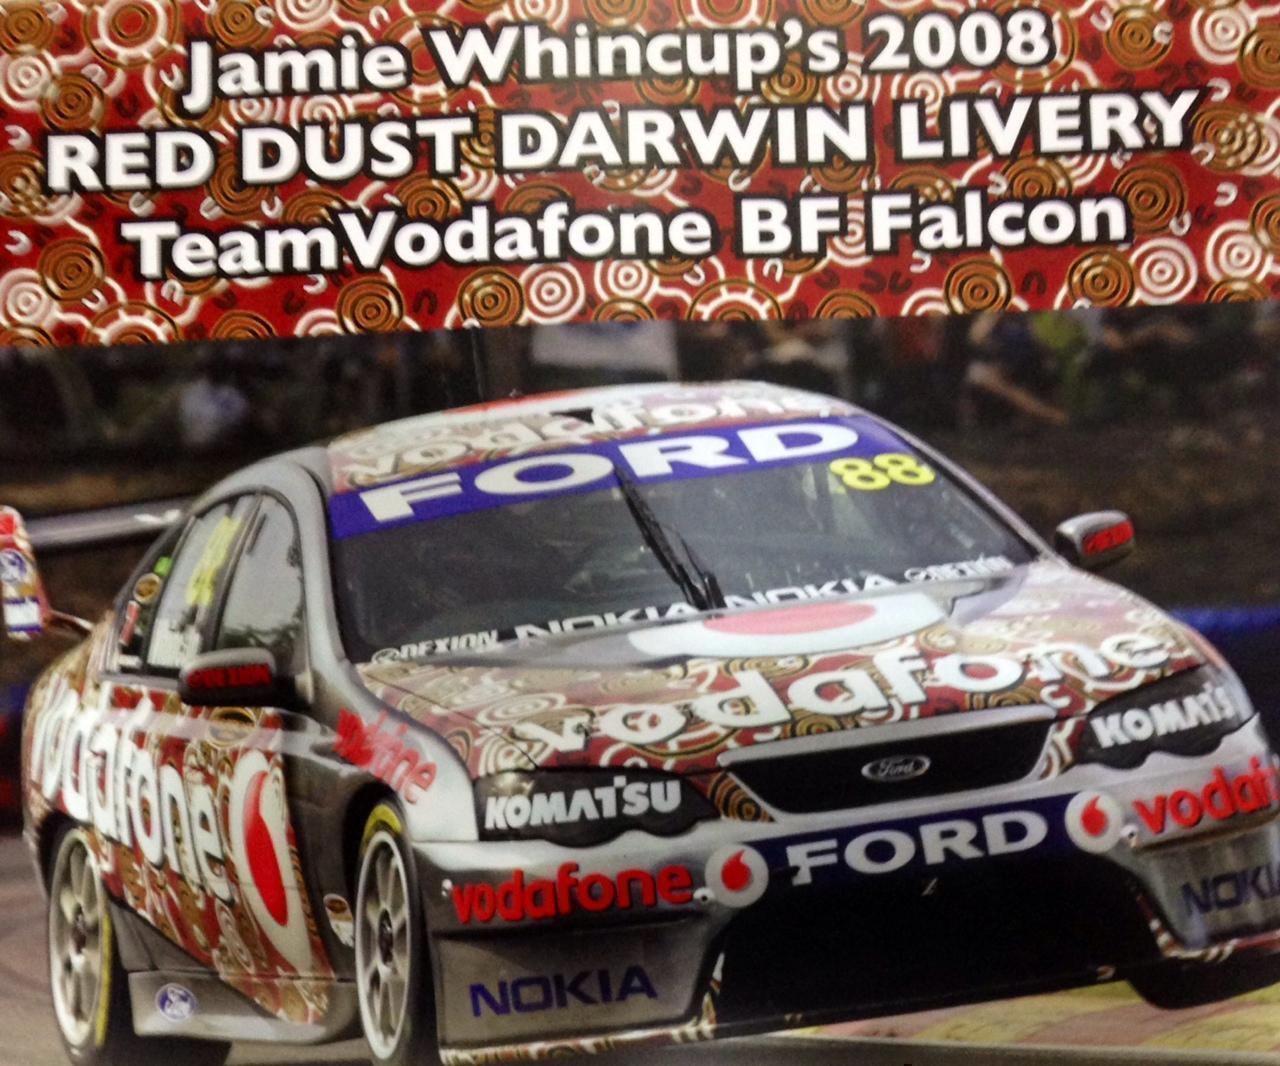 PRE-ORDER - Jamie Whincup 2008 Red Dust Darwin Livery Team Vodafone BF Falcon Die Cast Model Car 1:18